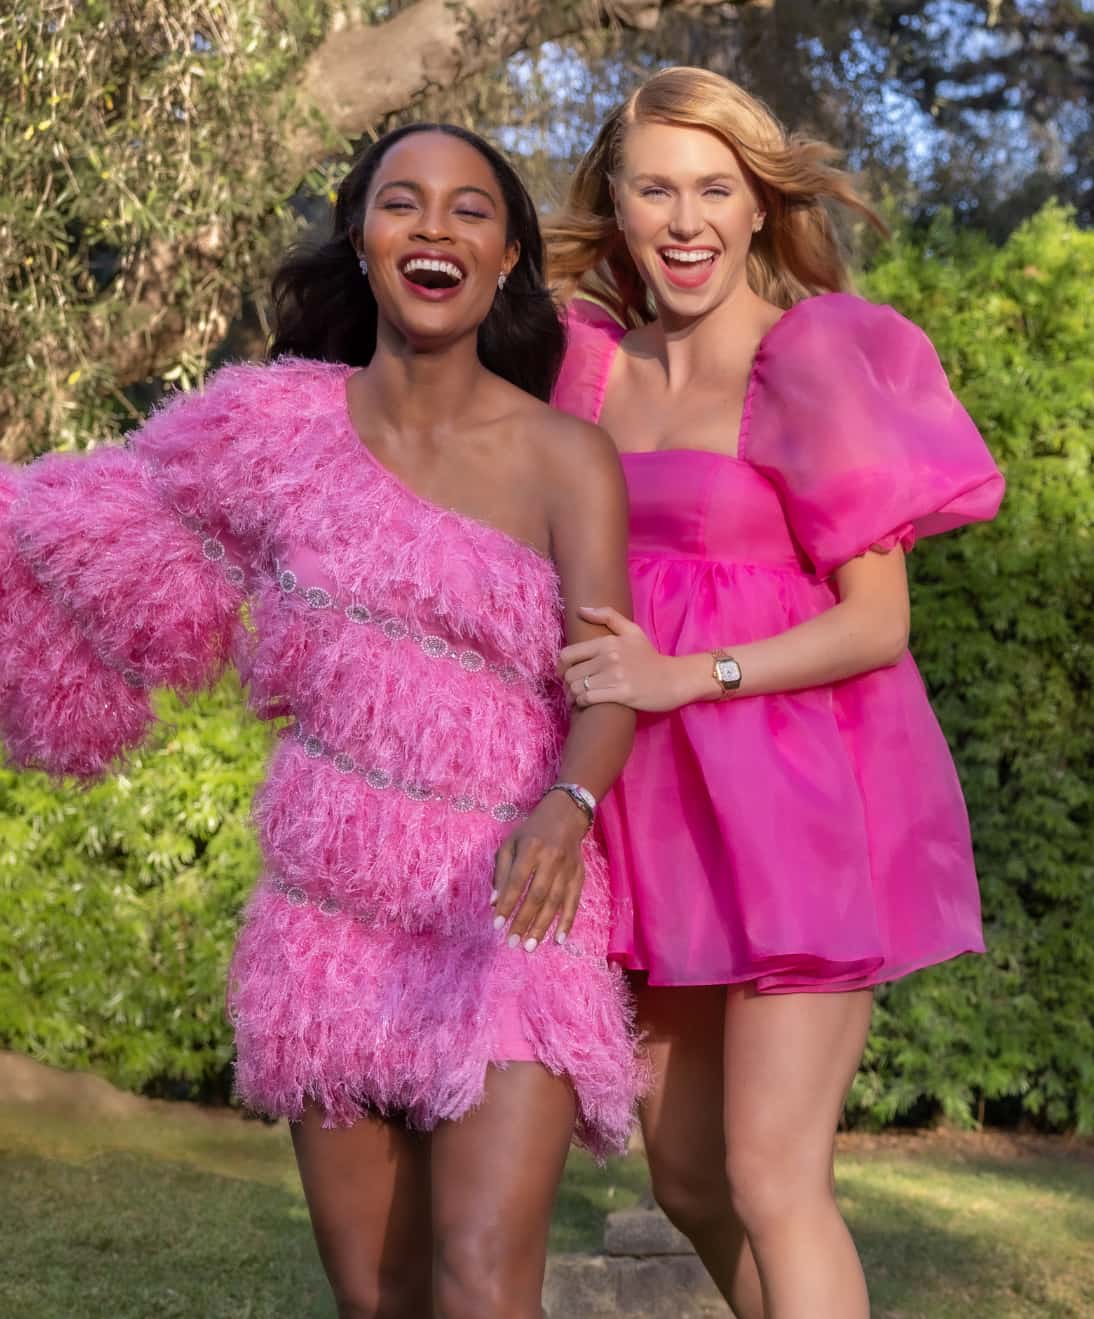 Image of 2 women in hot pink dresses wearing meggie watches by MICHELE